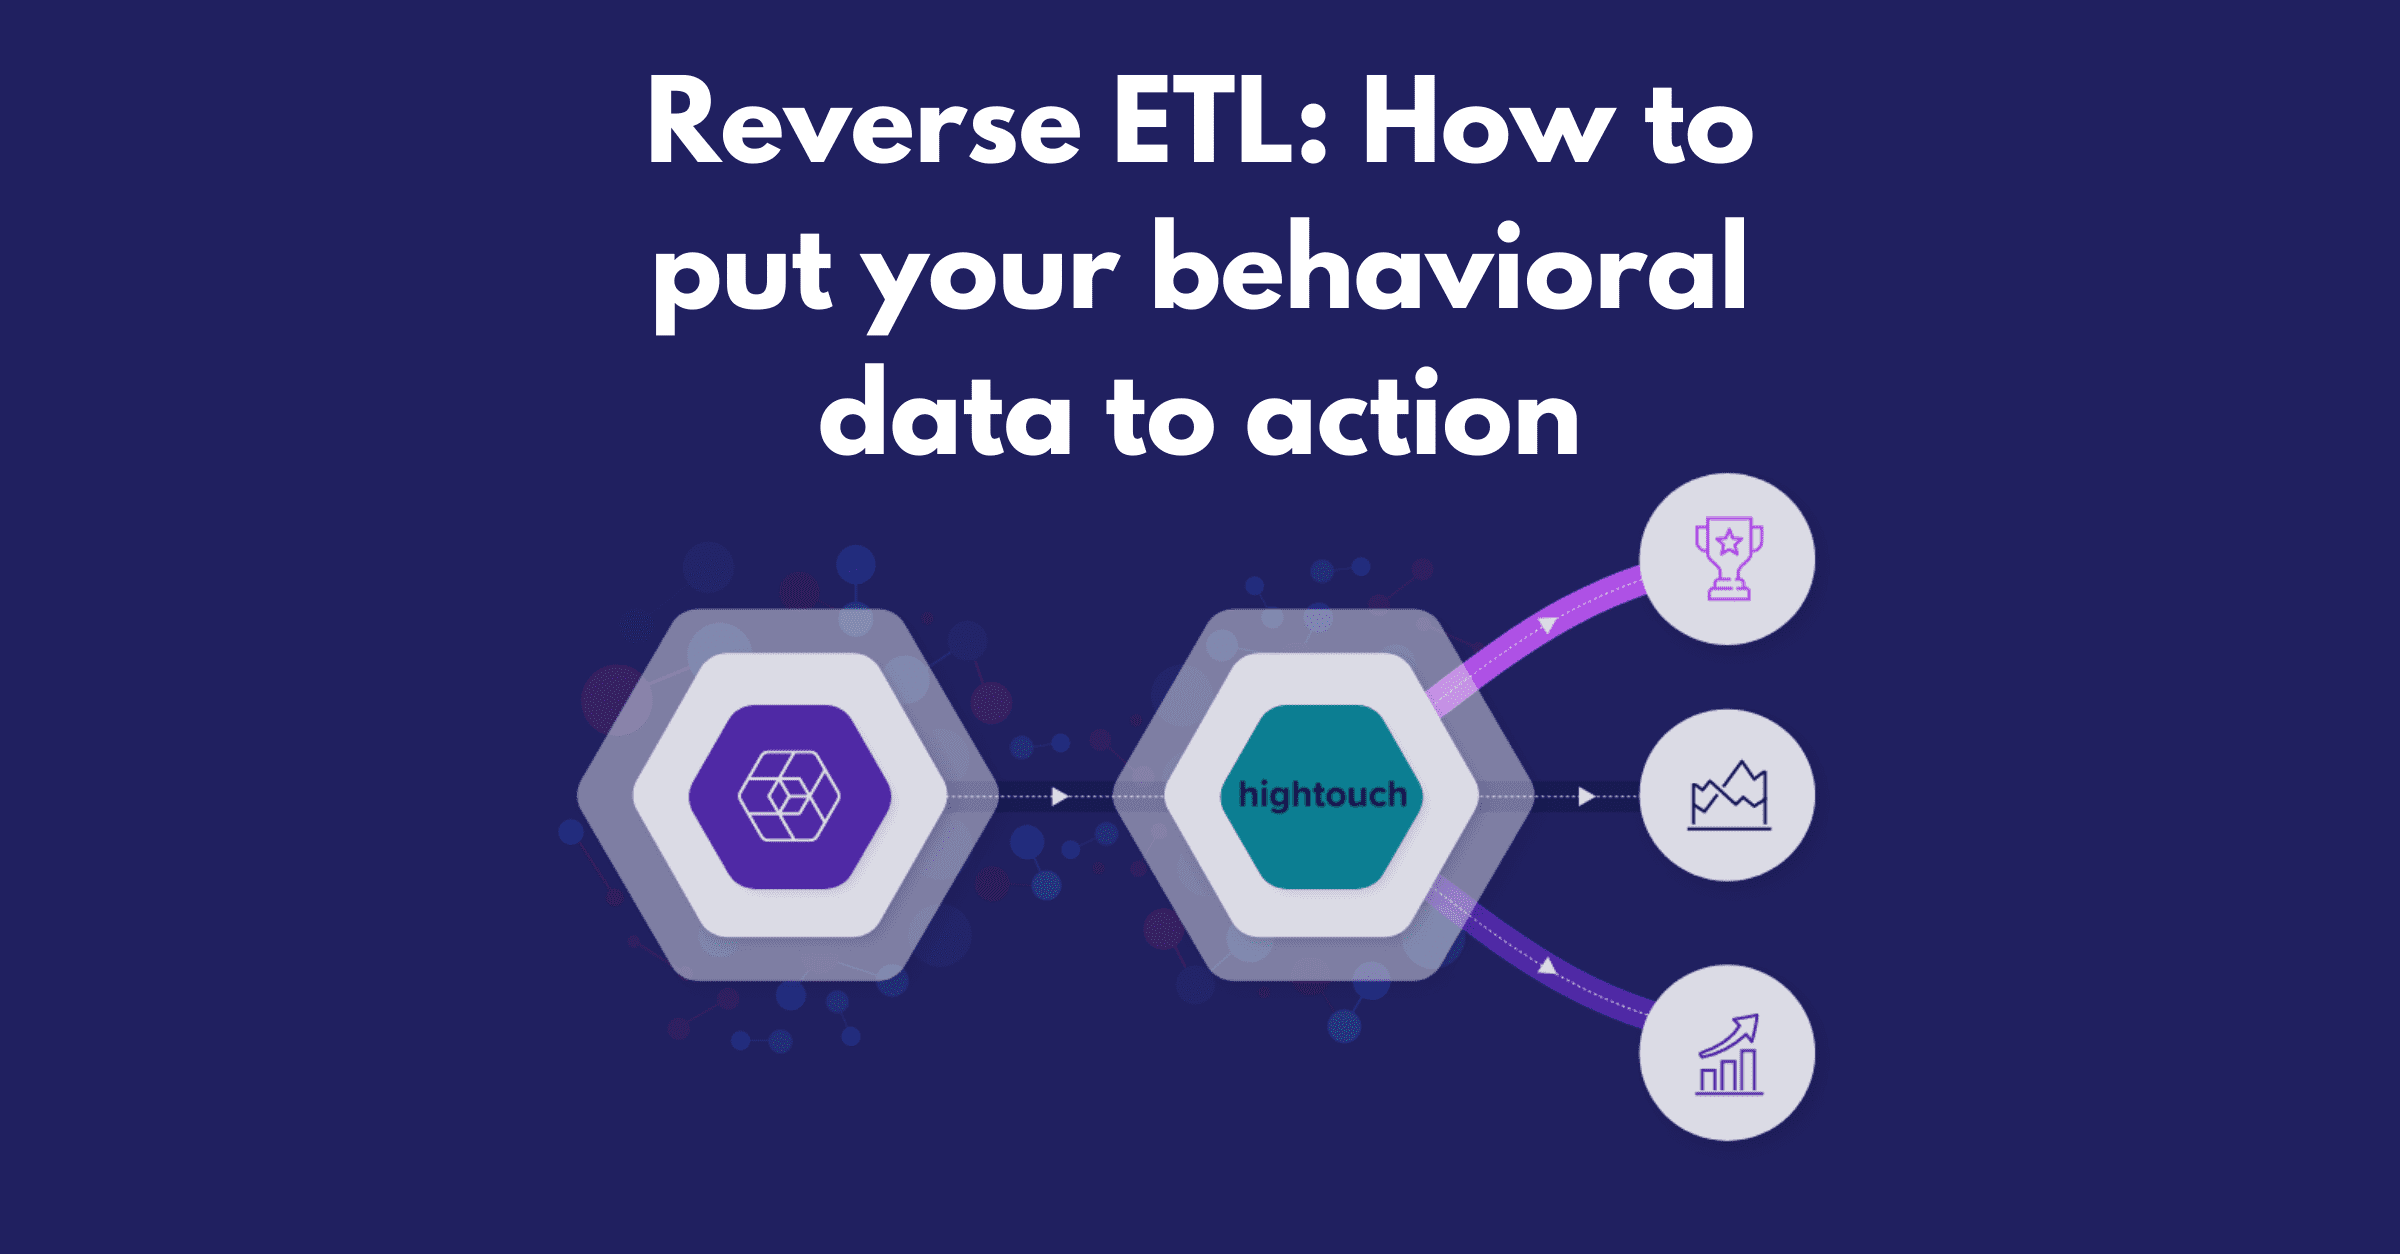 Reverse ETL: How to put your behavioral data to action